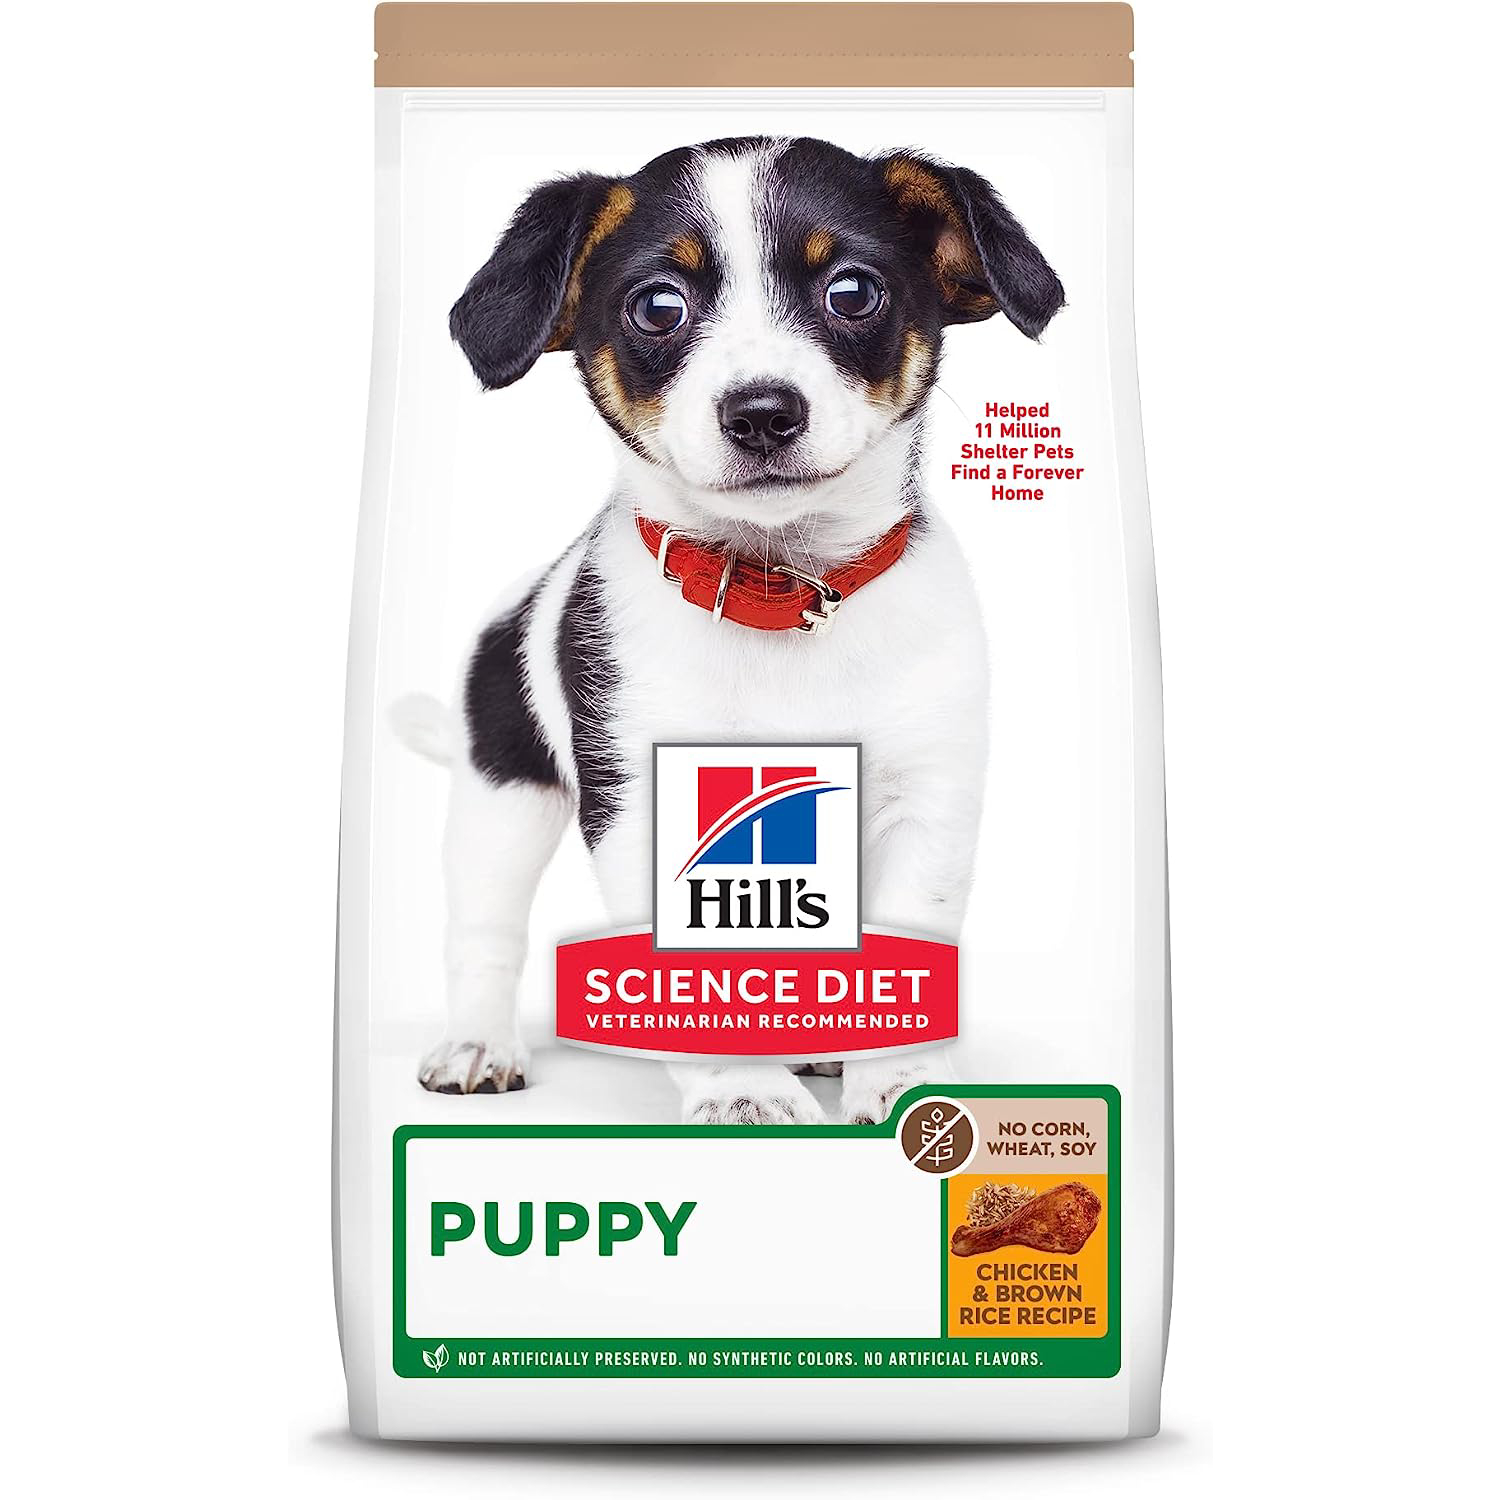 Hill's Science Diet Puppy No Corn, Wheat or Soy Dry Dog Food 